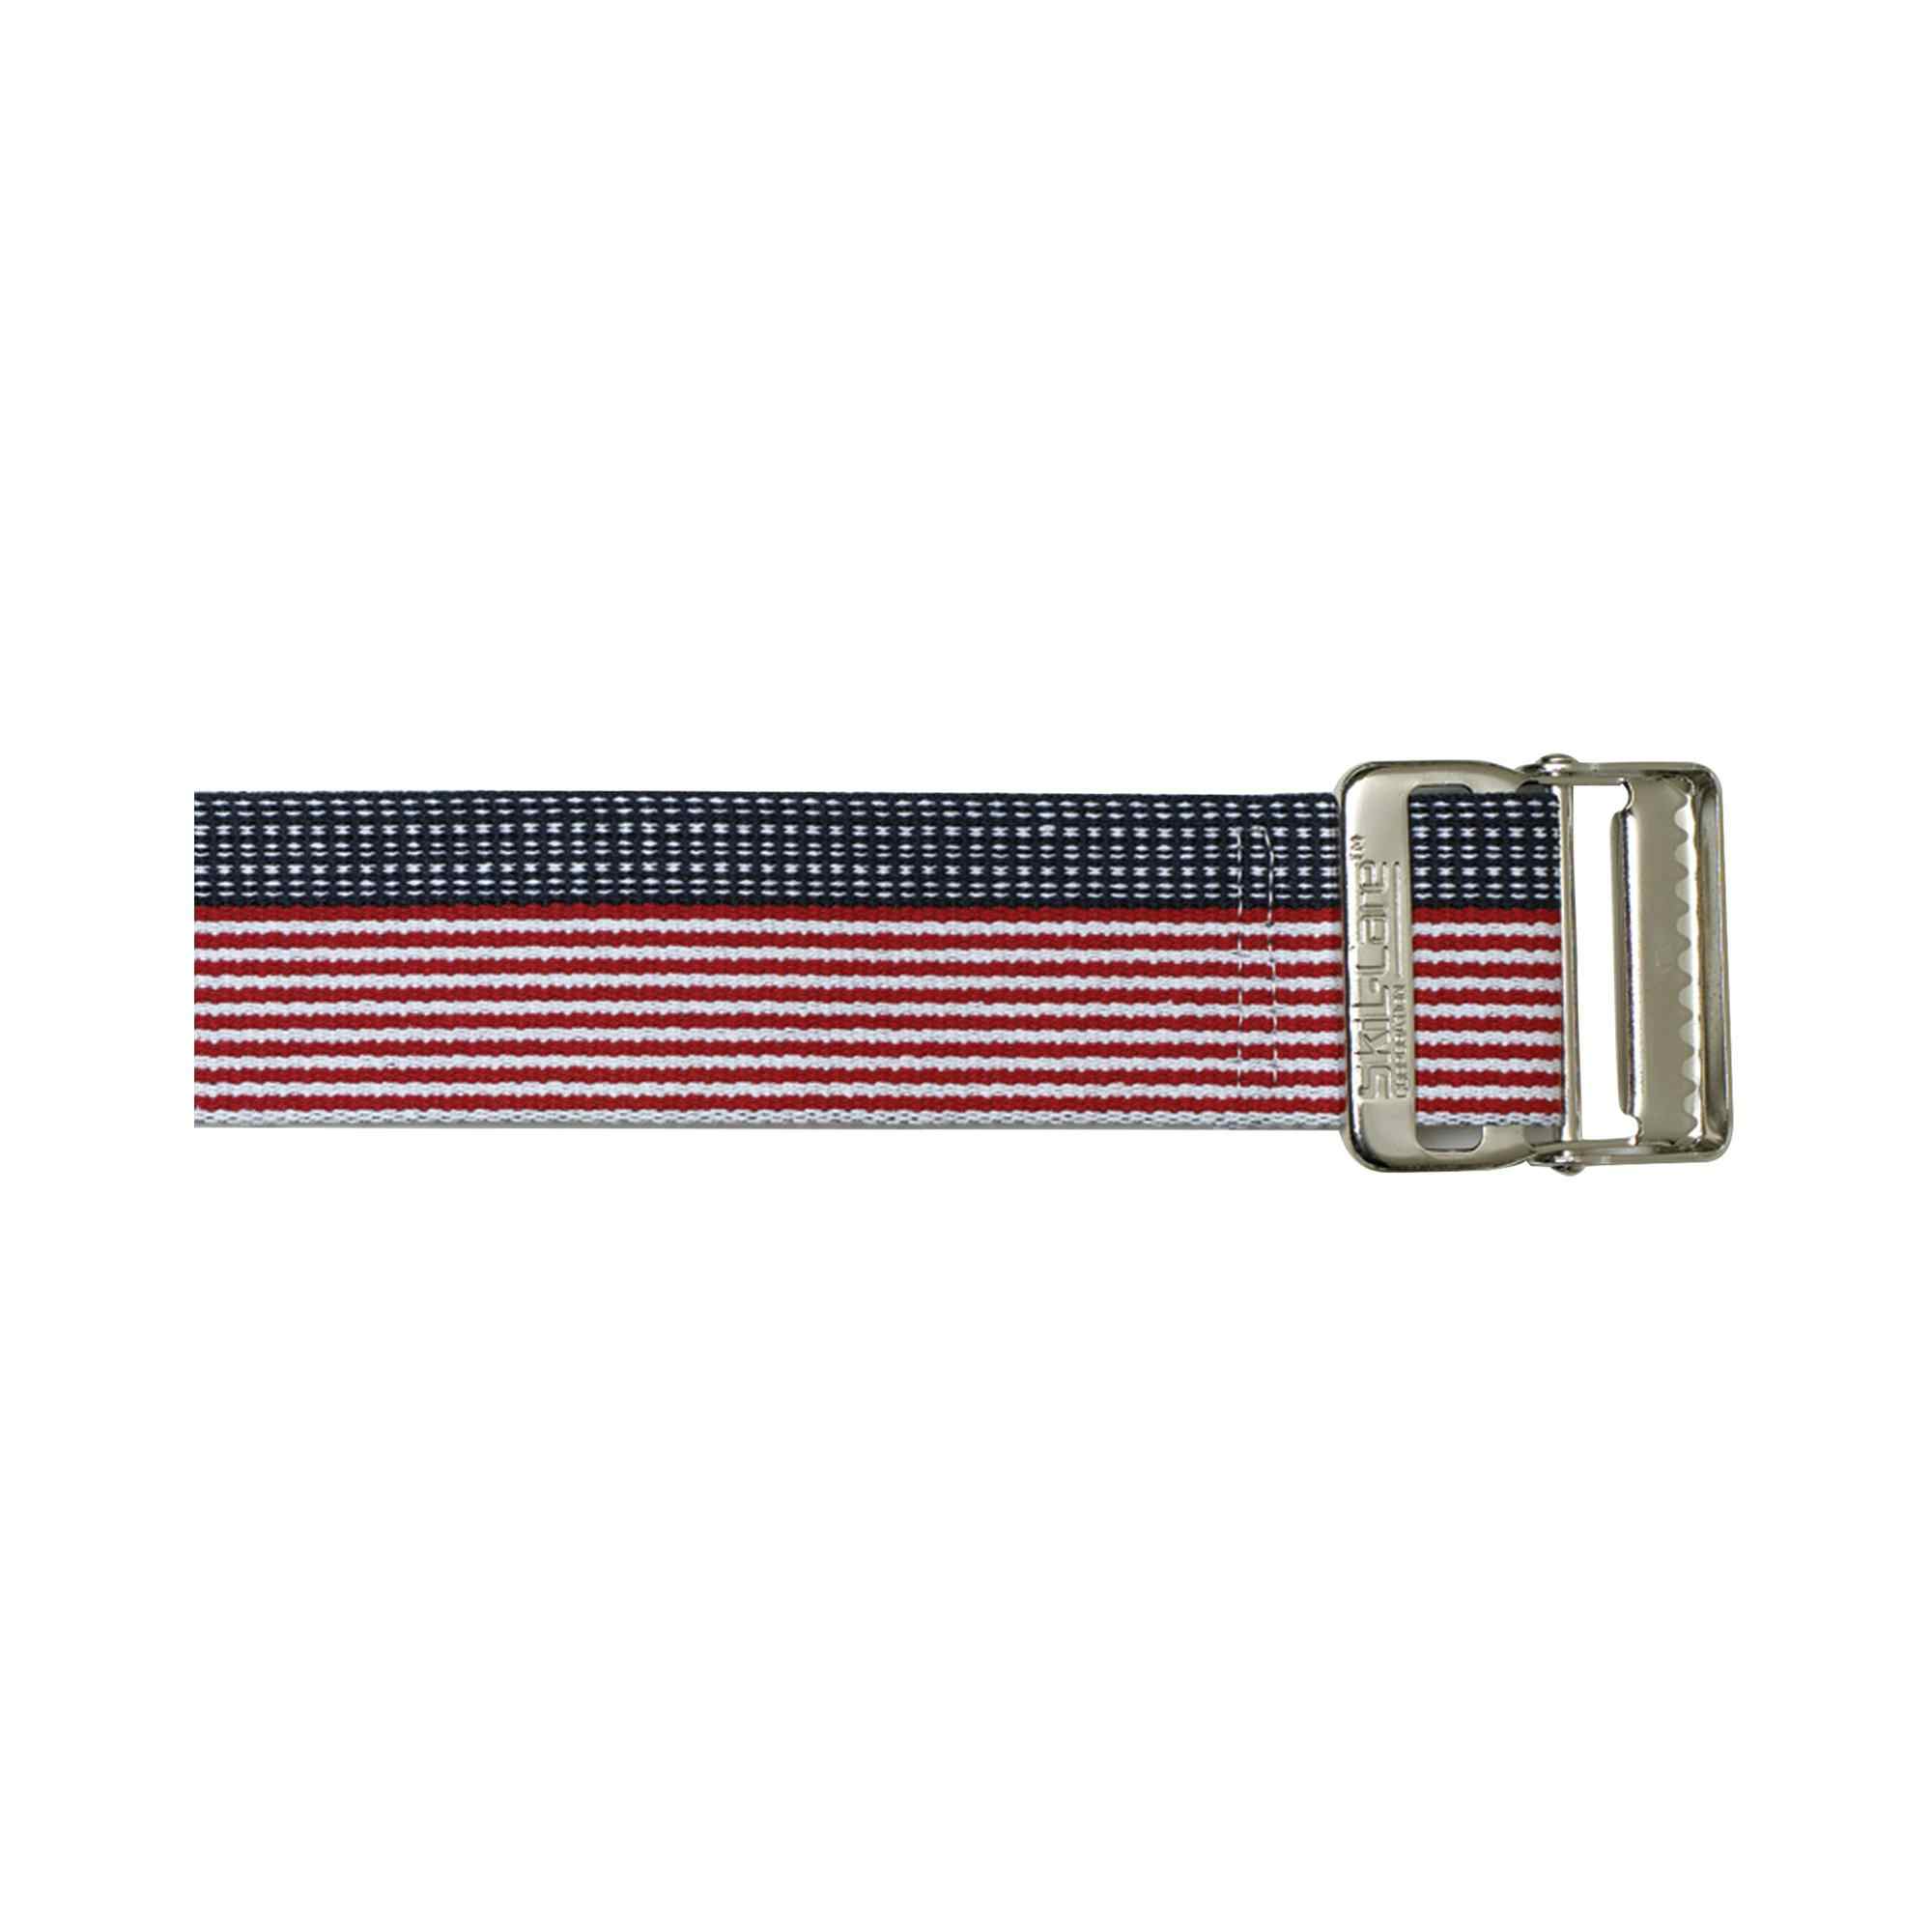 SkiL-Care Cotton Gait Belt, Multiple Colors, 252073, 72 Inch - Stars and Stripes